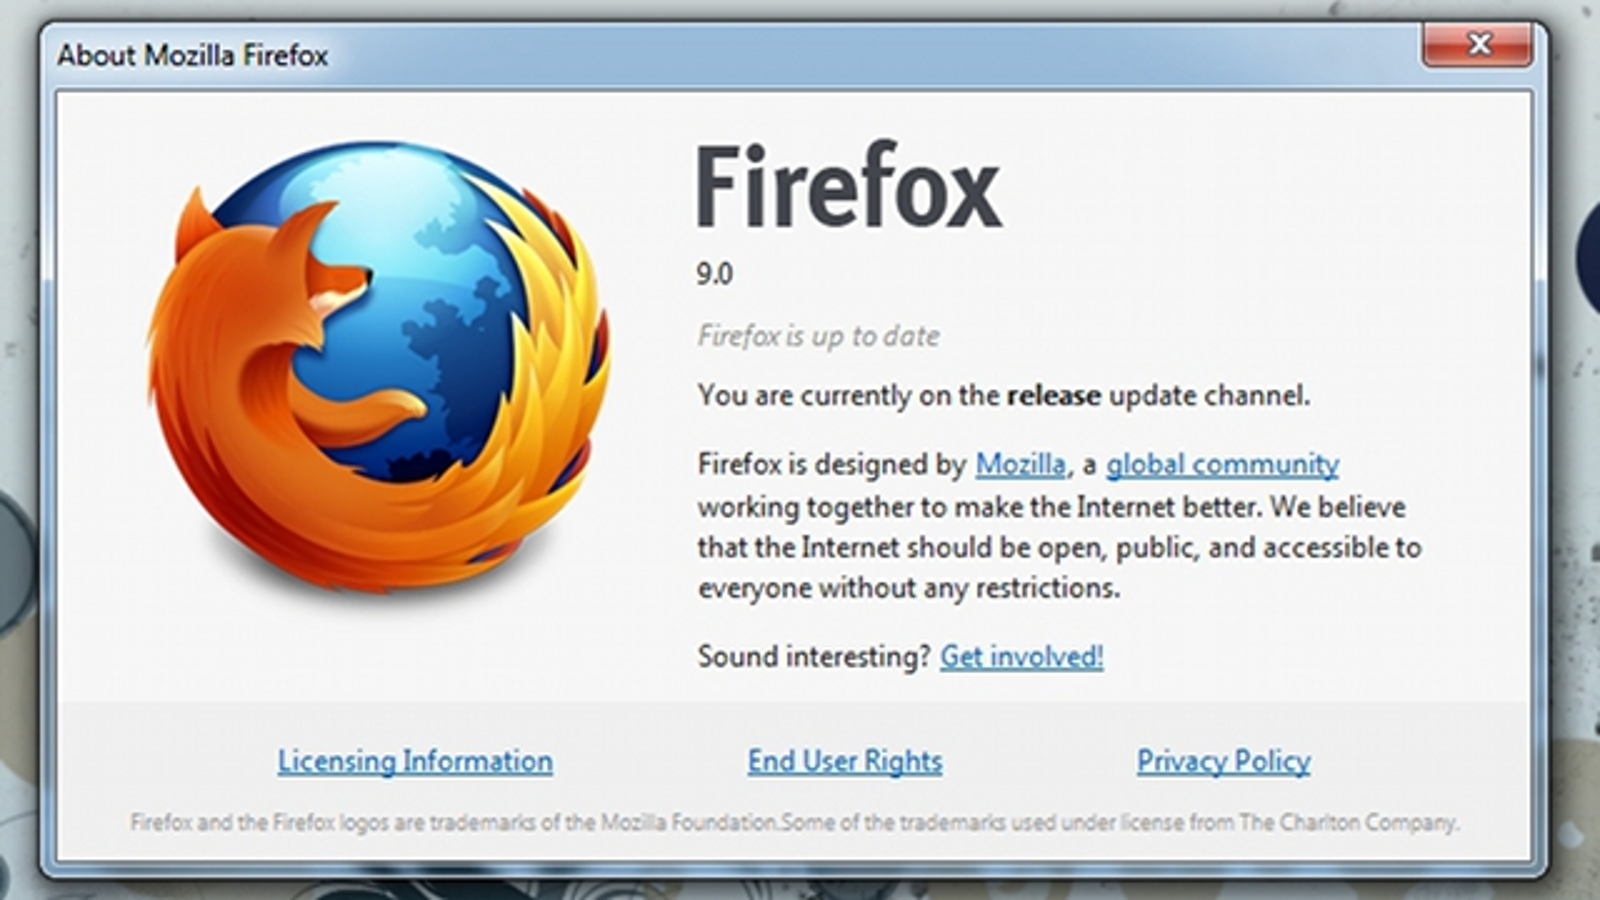 download firefox for mac os x lion 10.7.5